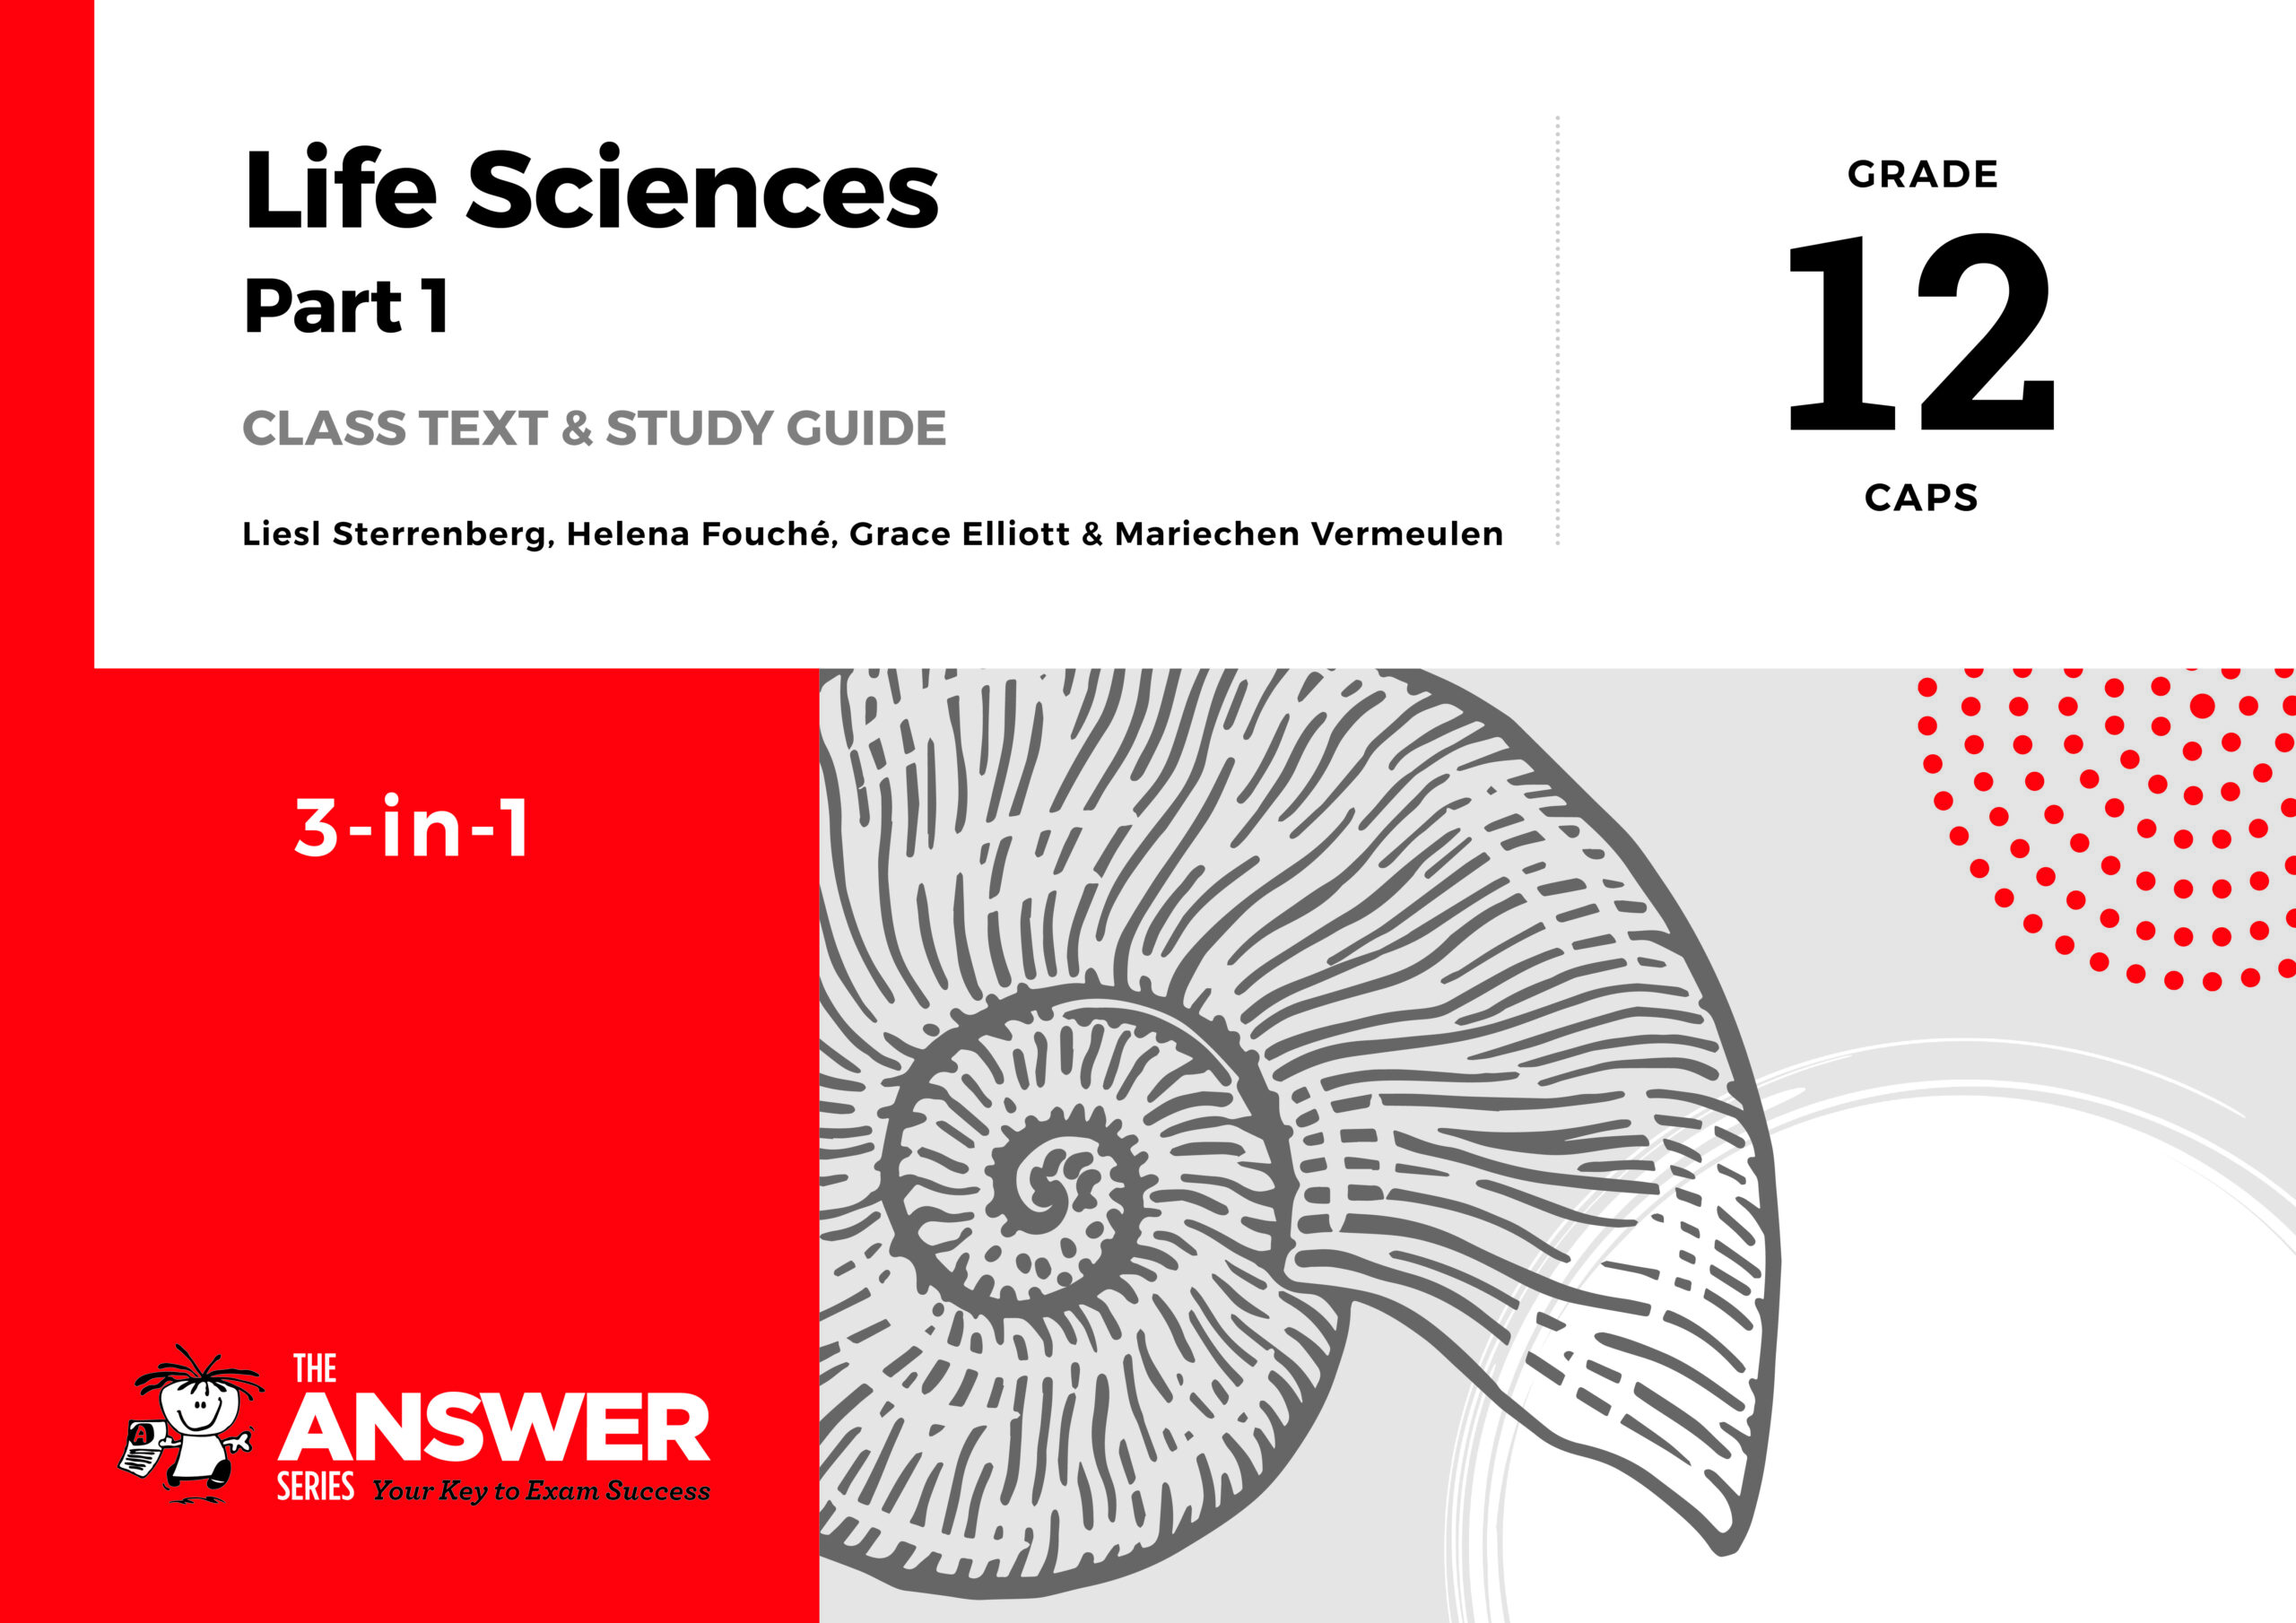 3-in-1　Sciences　Grade　Series　12　Answer　Life　Part　CAPS　The